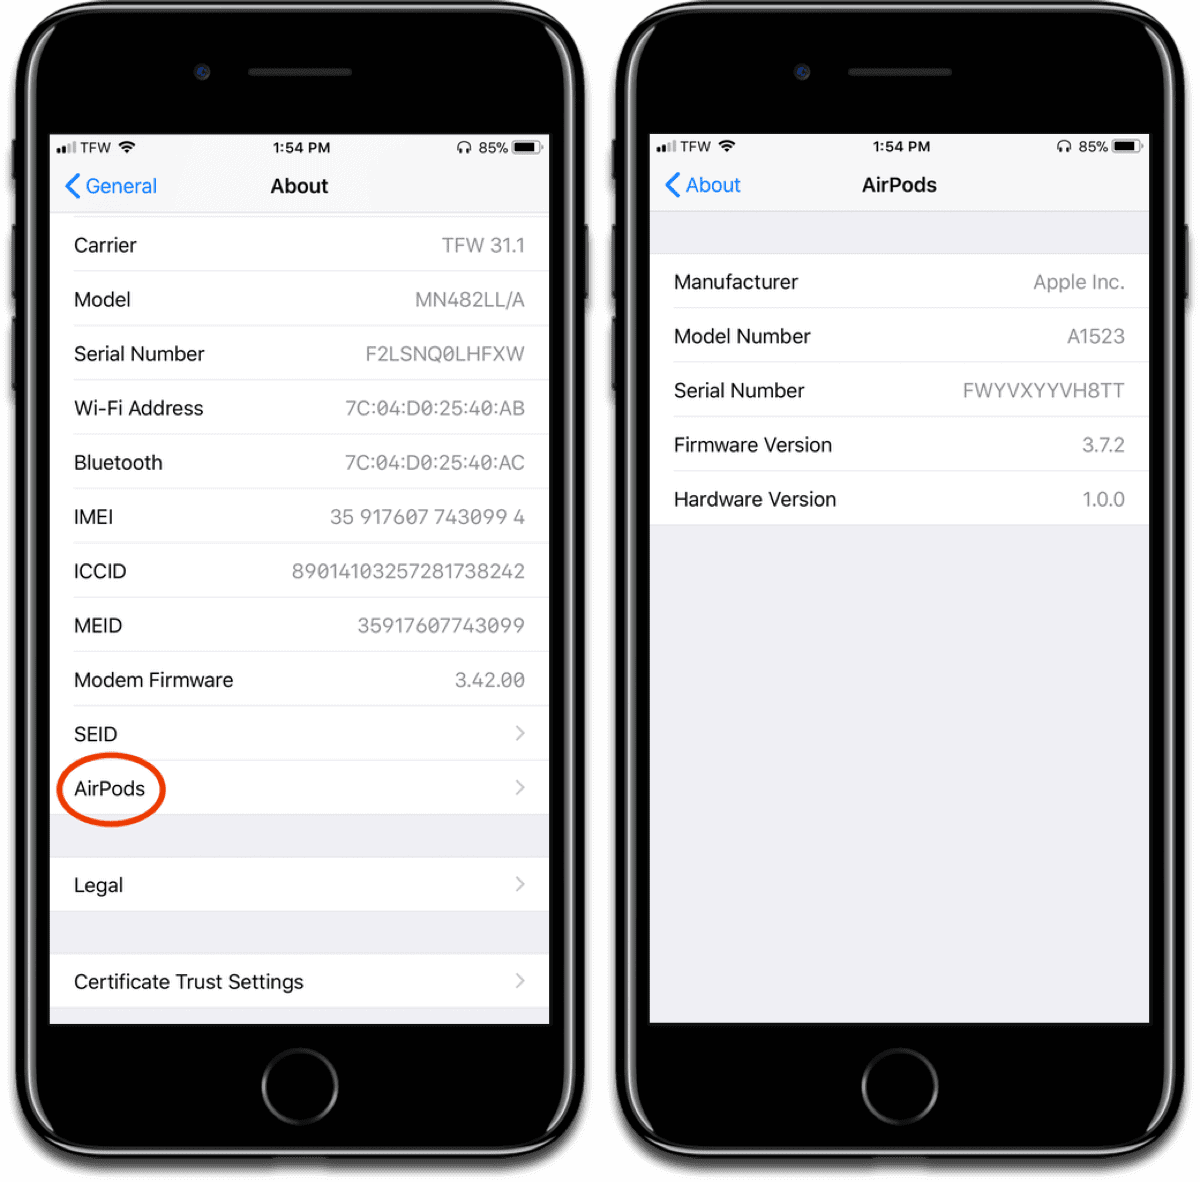 Where to go in iOS settings to check AirPods firmware.